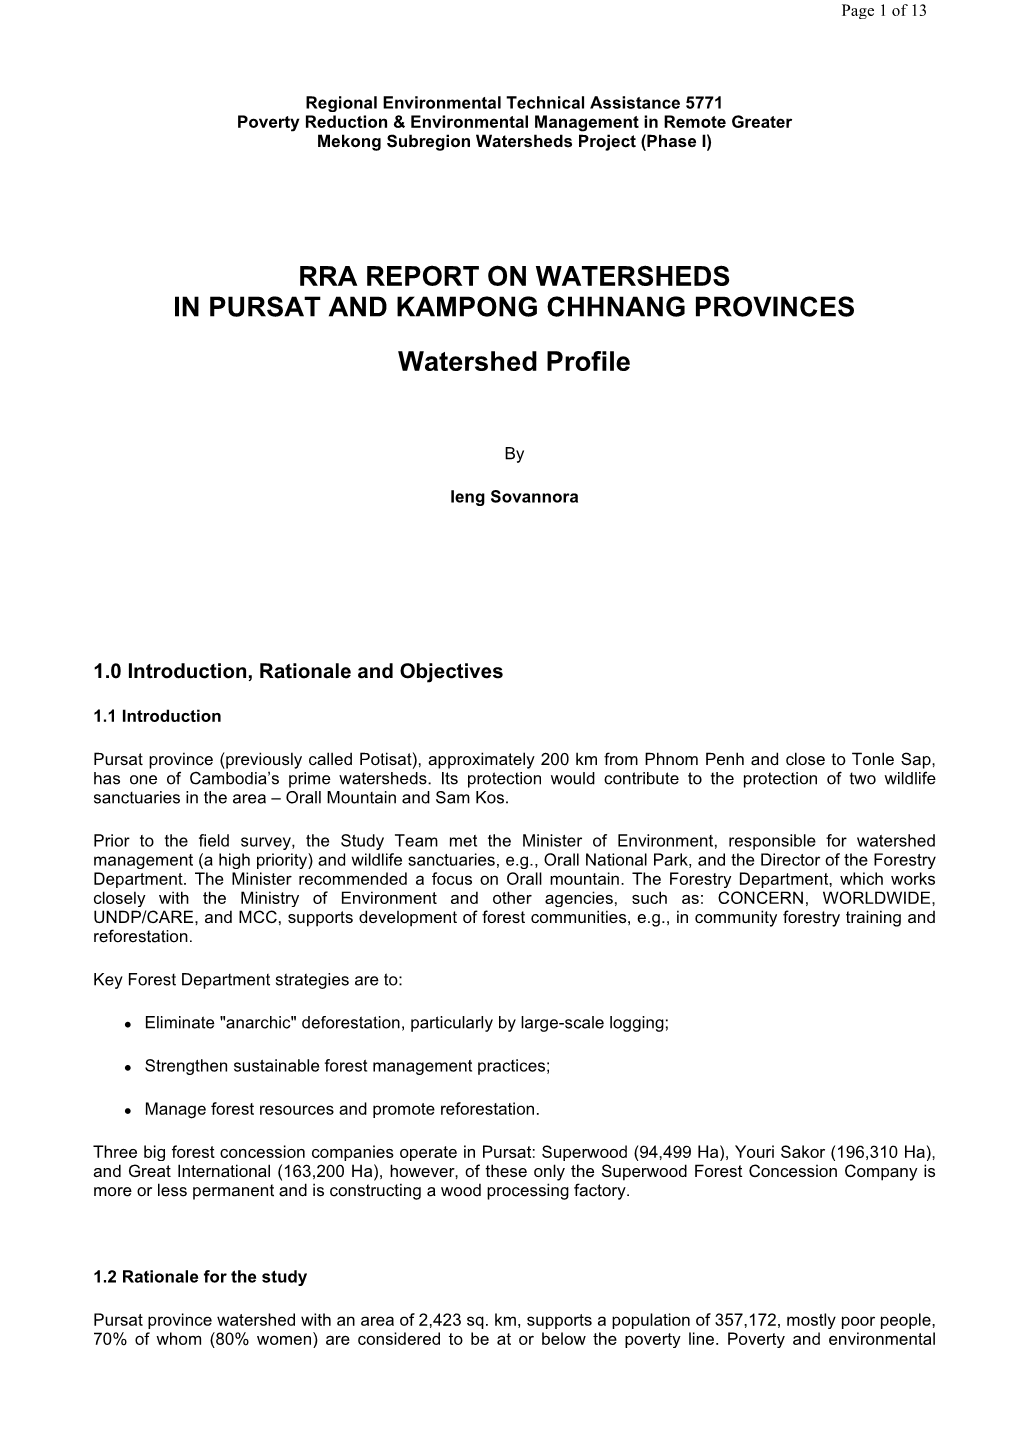 RRA REPORT on WATERSHEDS in PURSAT and KAMPONG CHHNANG PROVINCES Watershed Profile